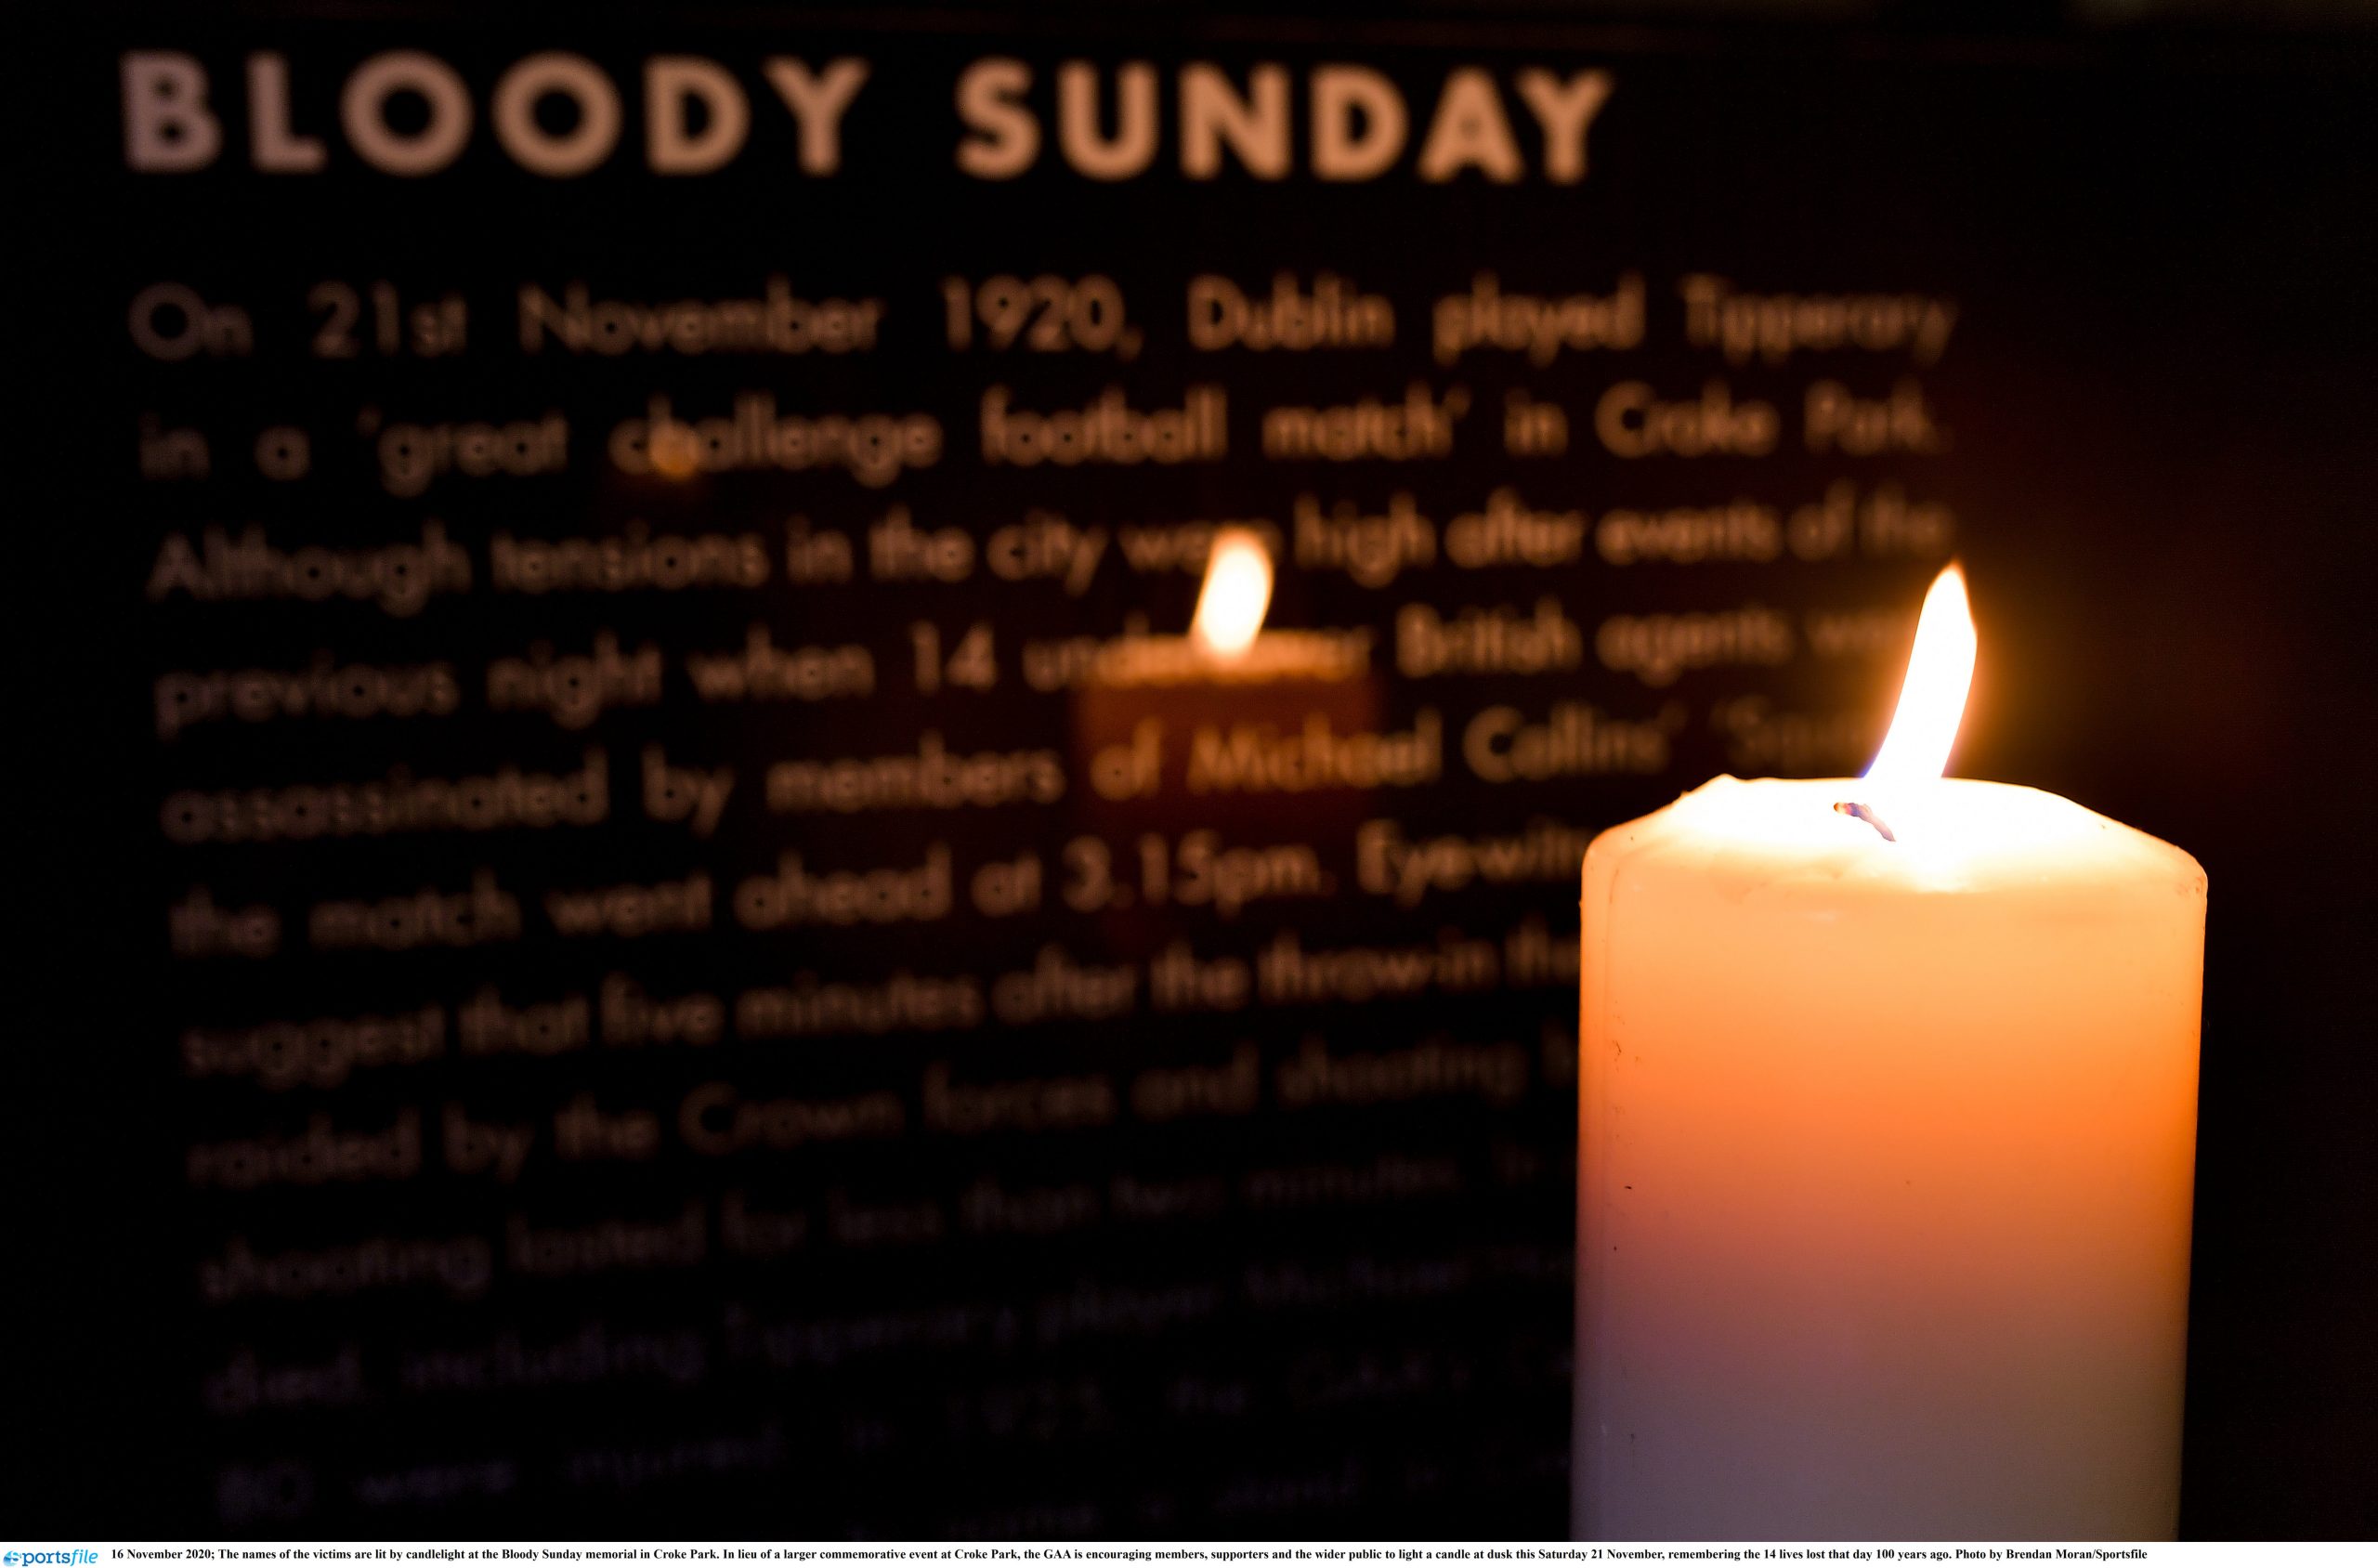 B100dy Sunday – A Candle at Dusk and other commemorative events